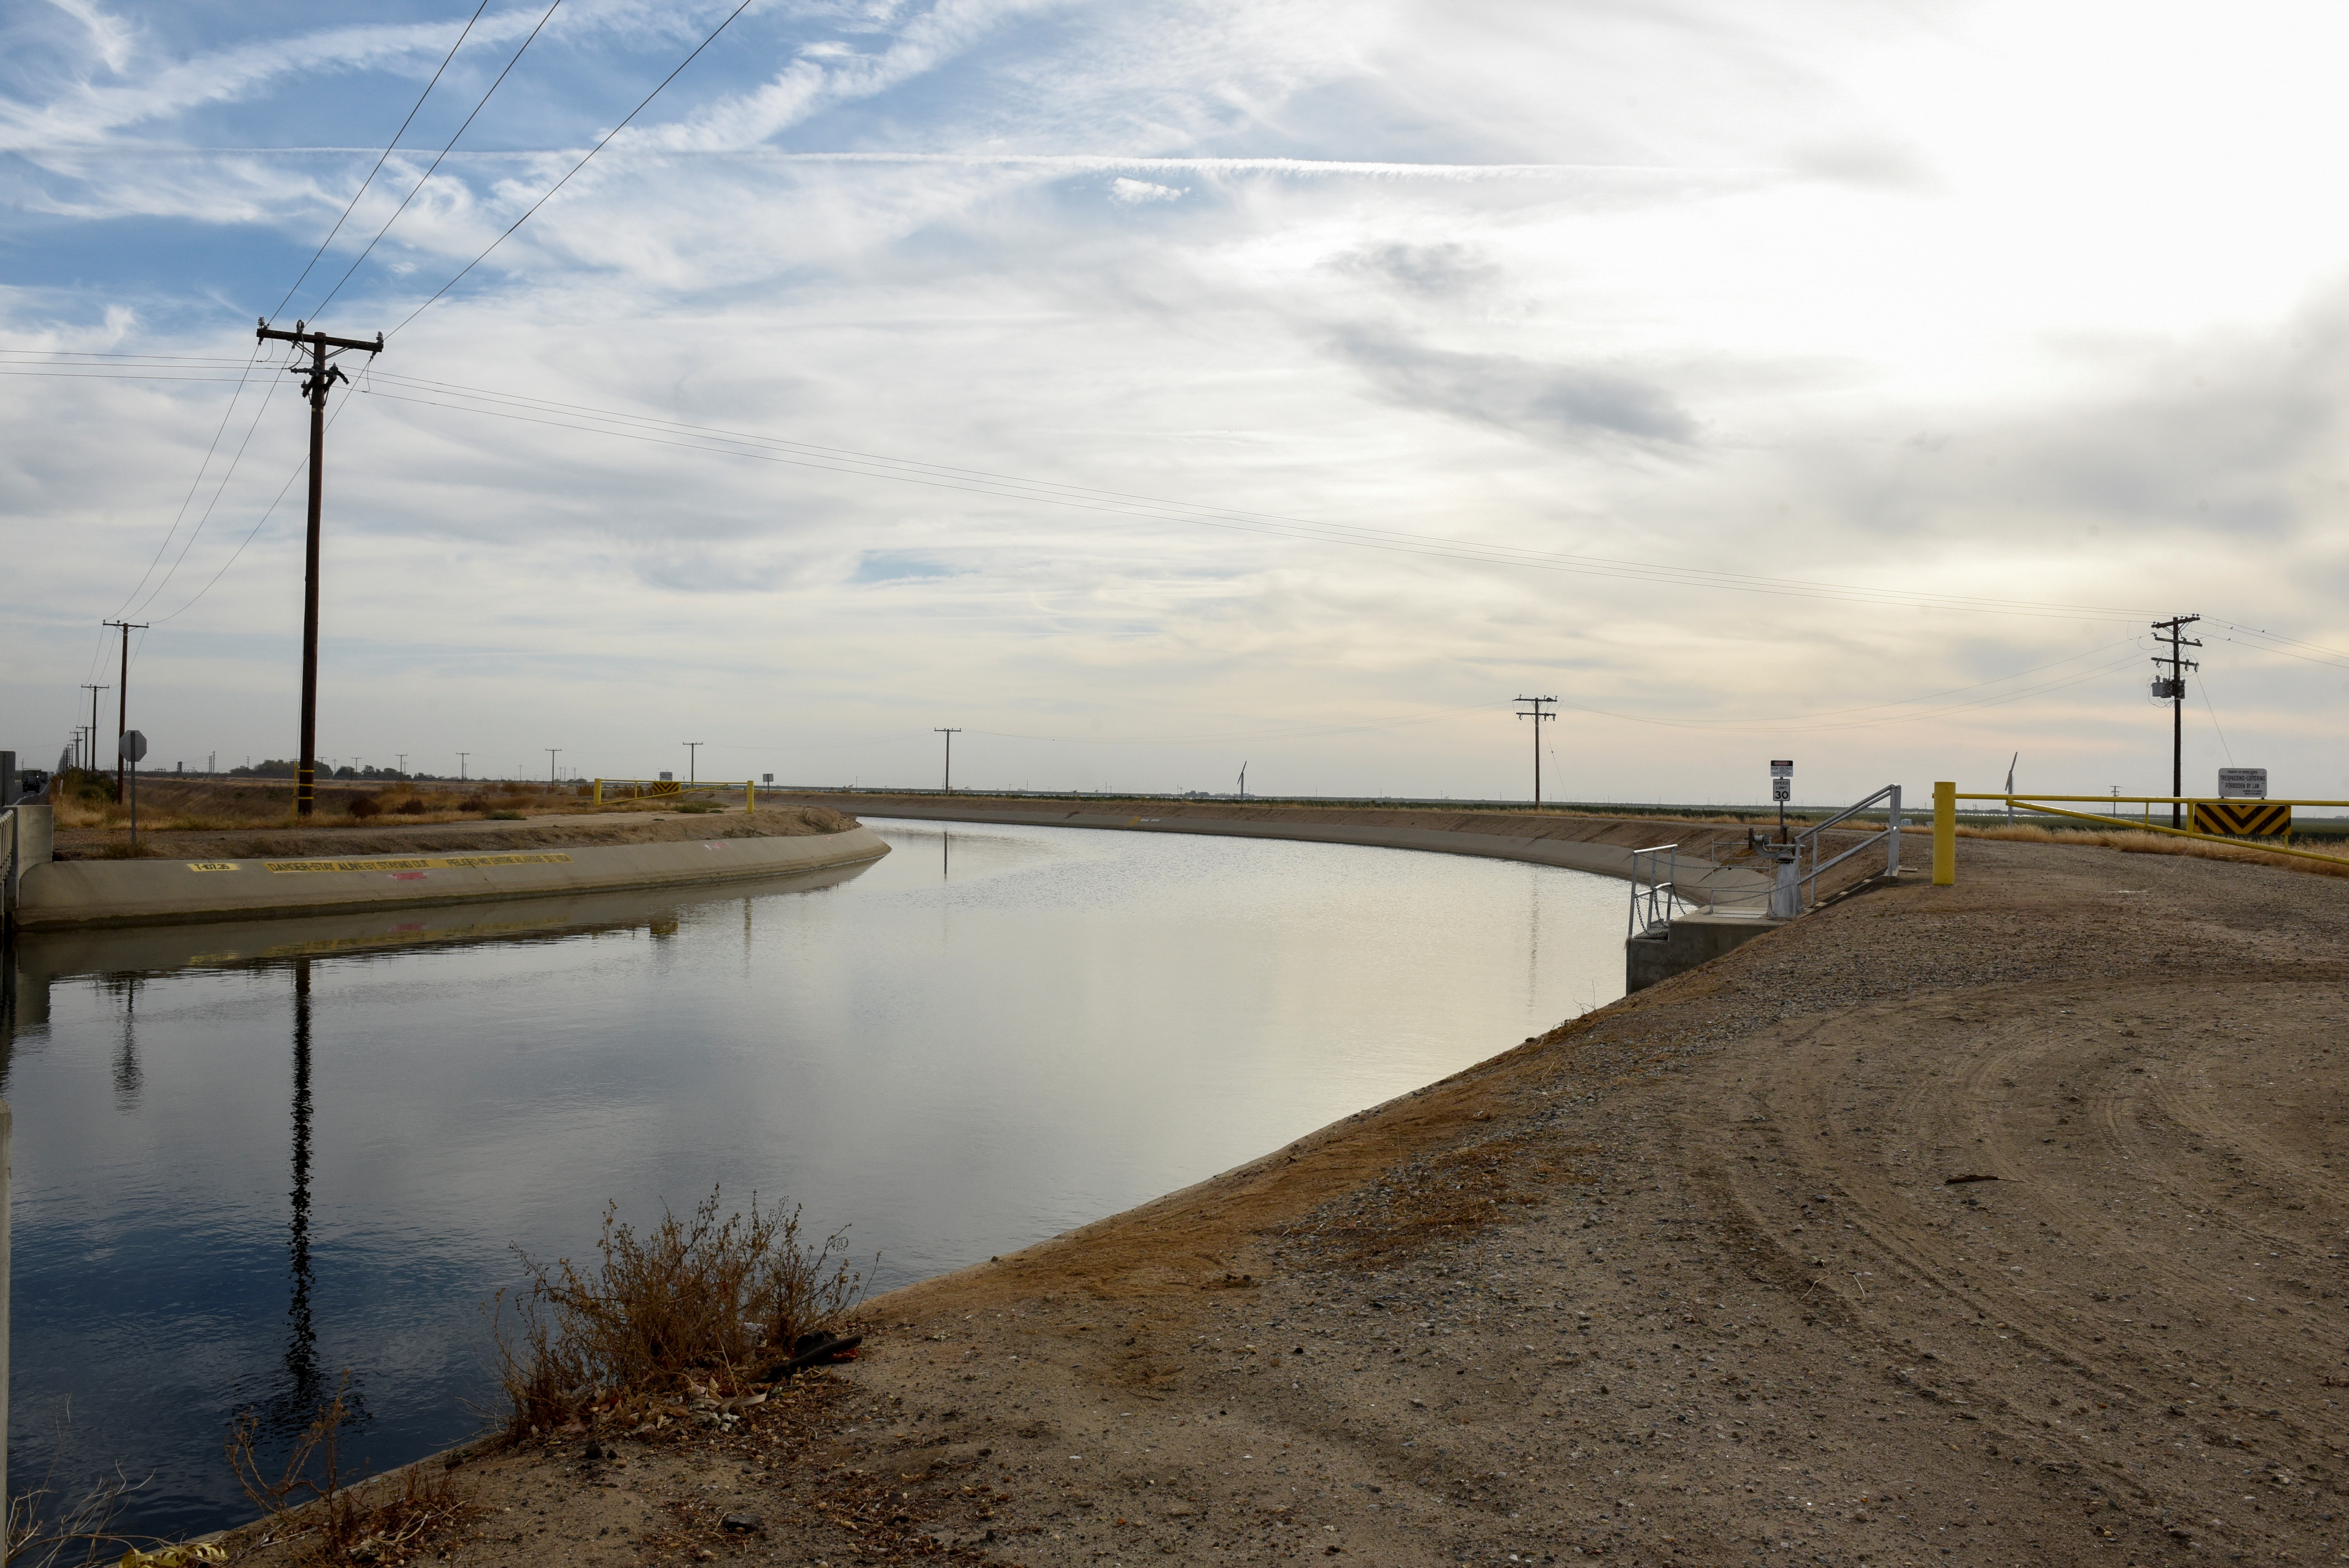 California farm town lurches from no water to polluted water